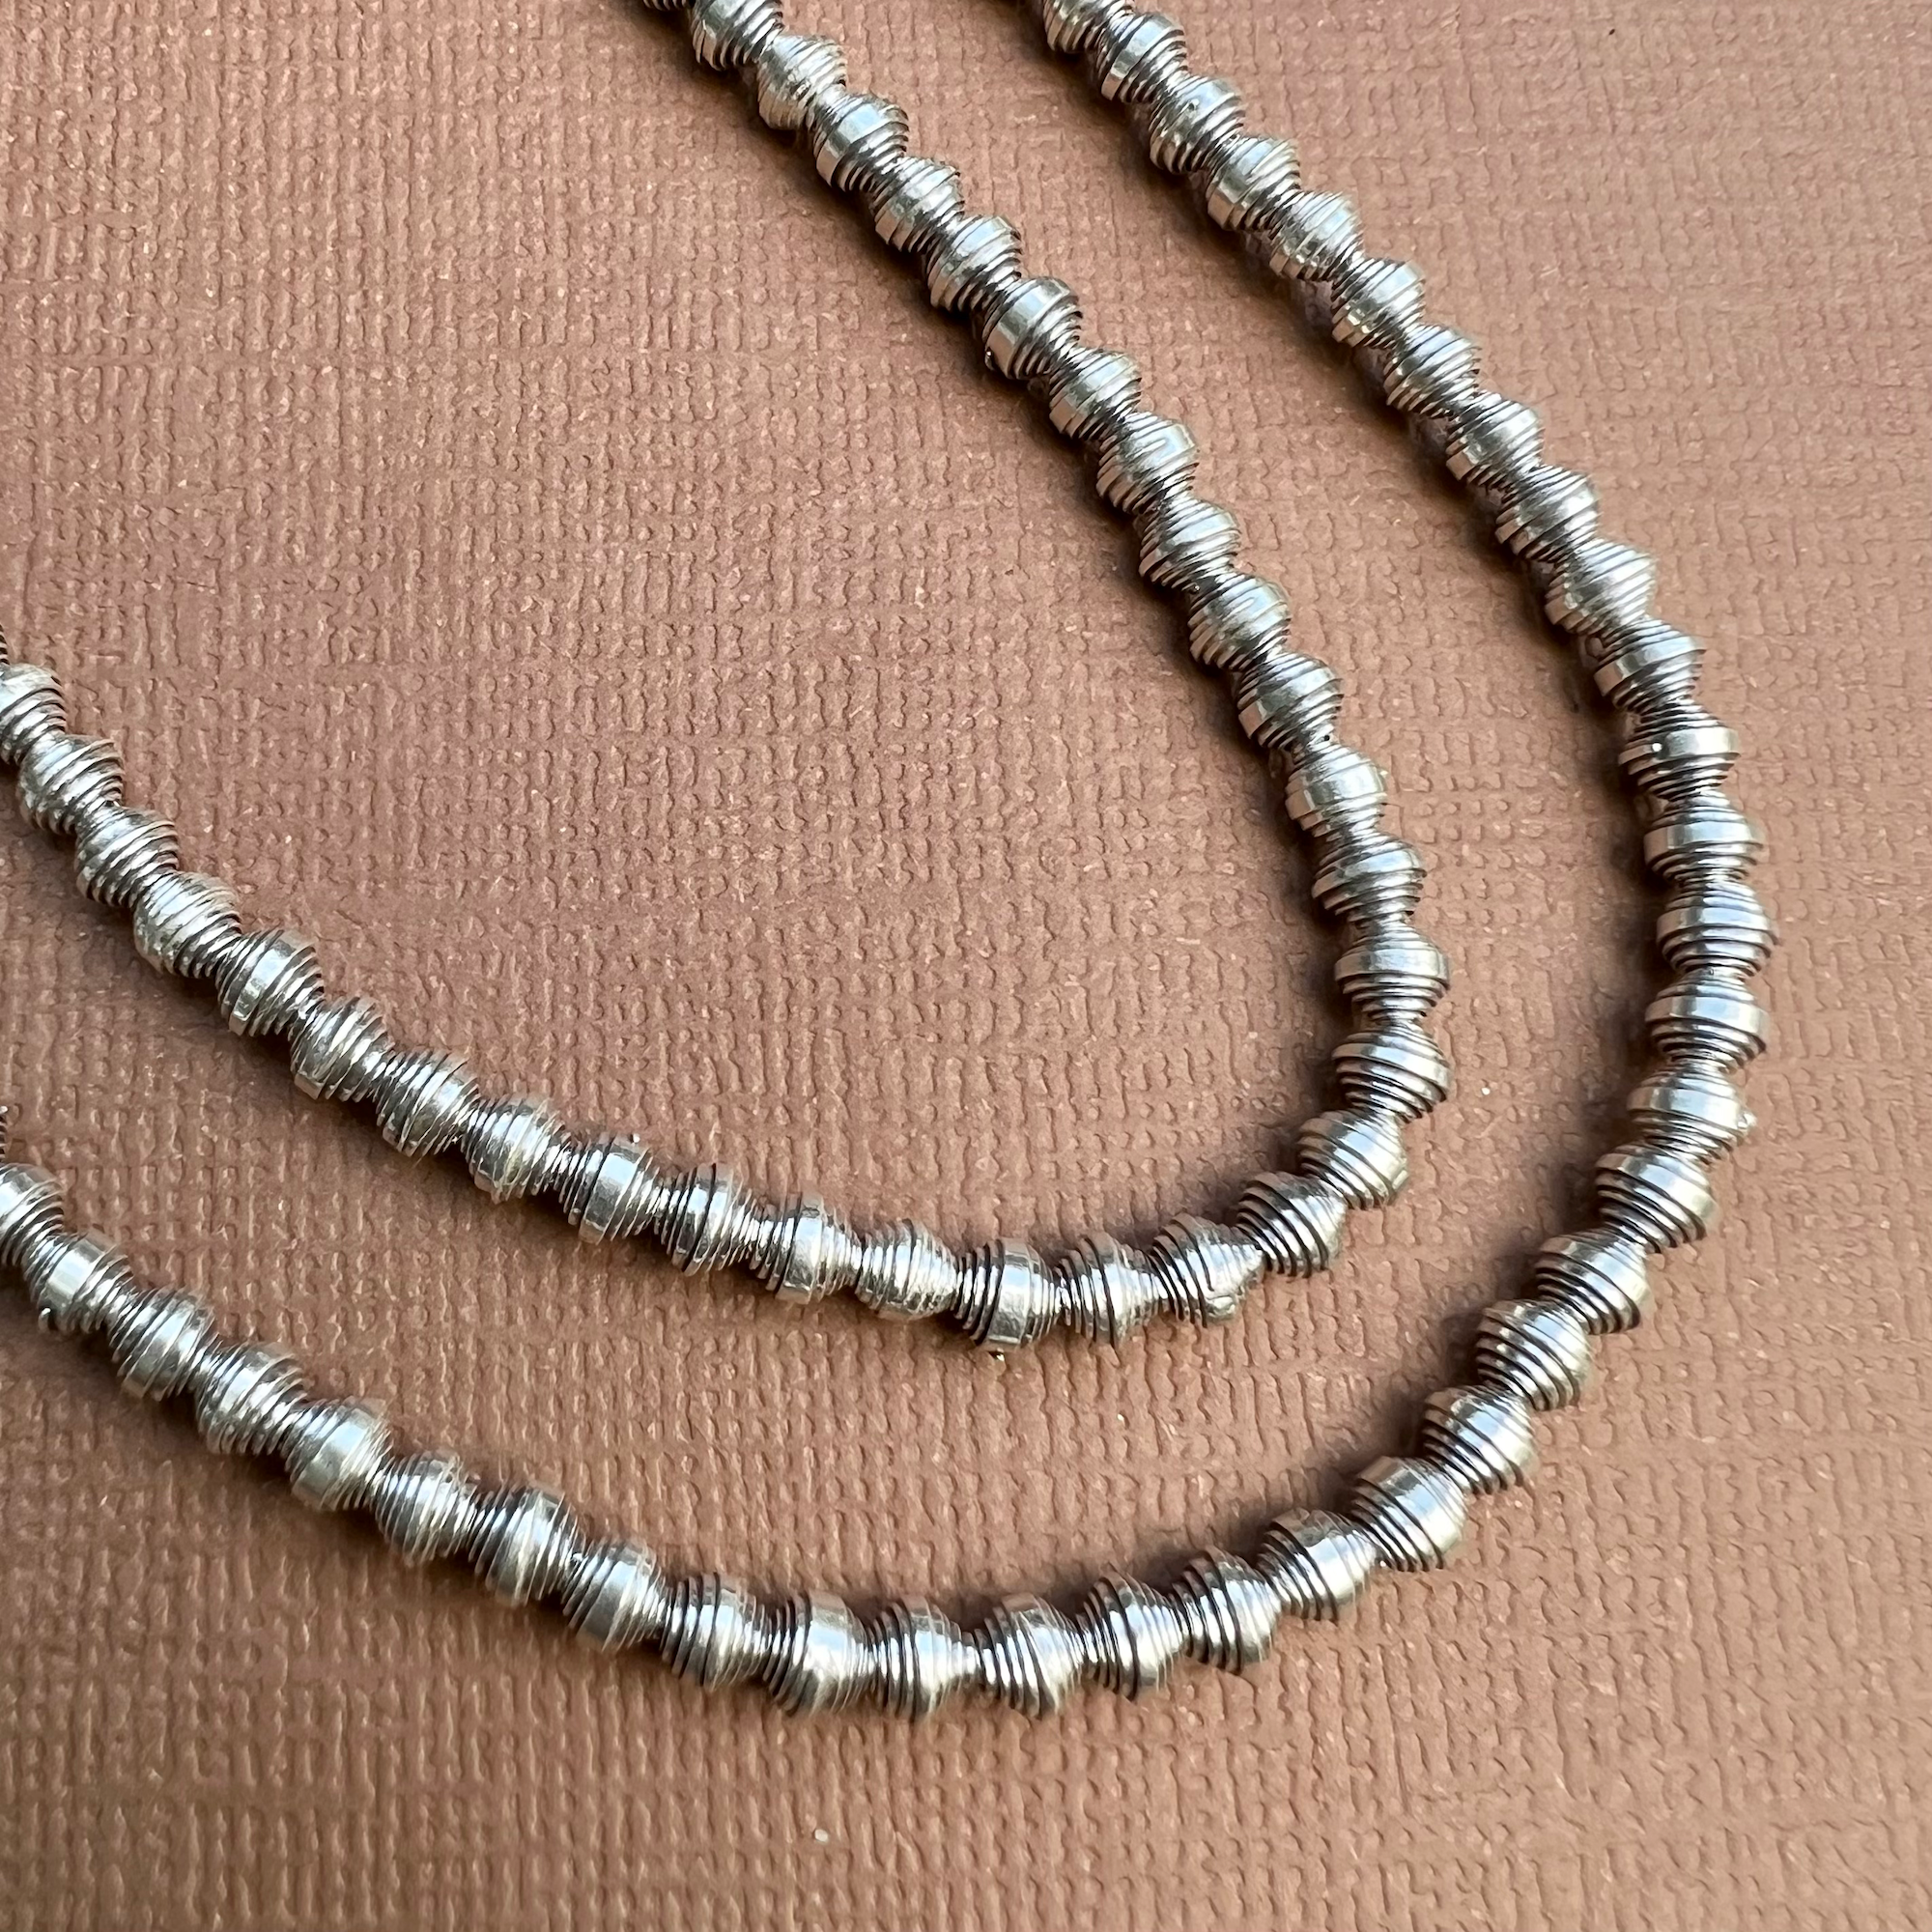 Hill Tribe Silver Spiral Beads